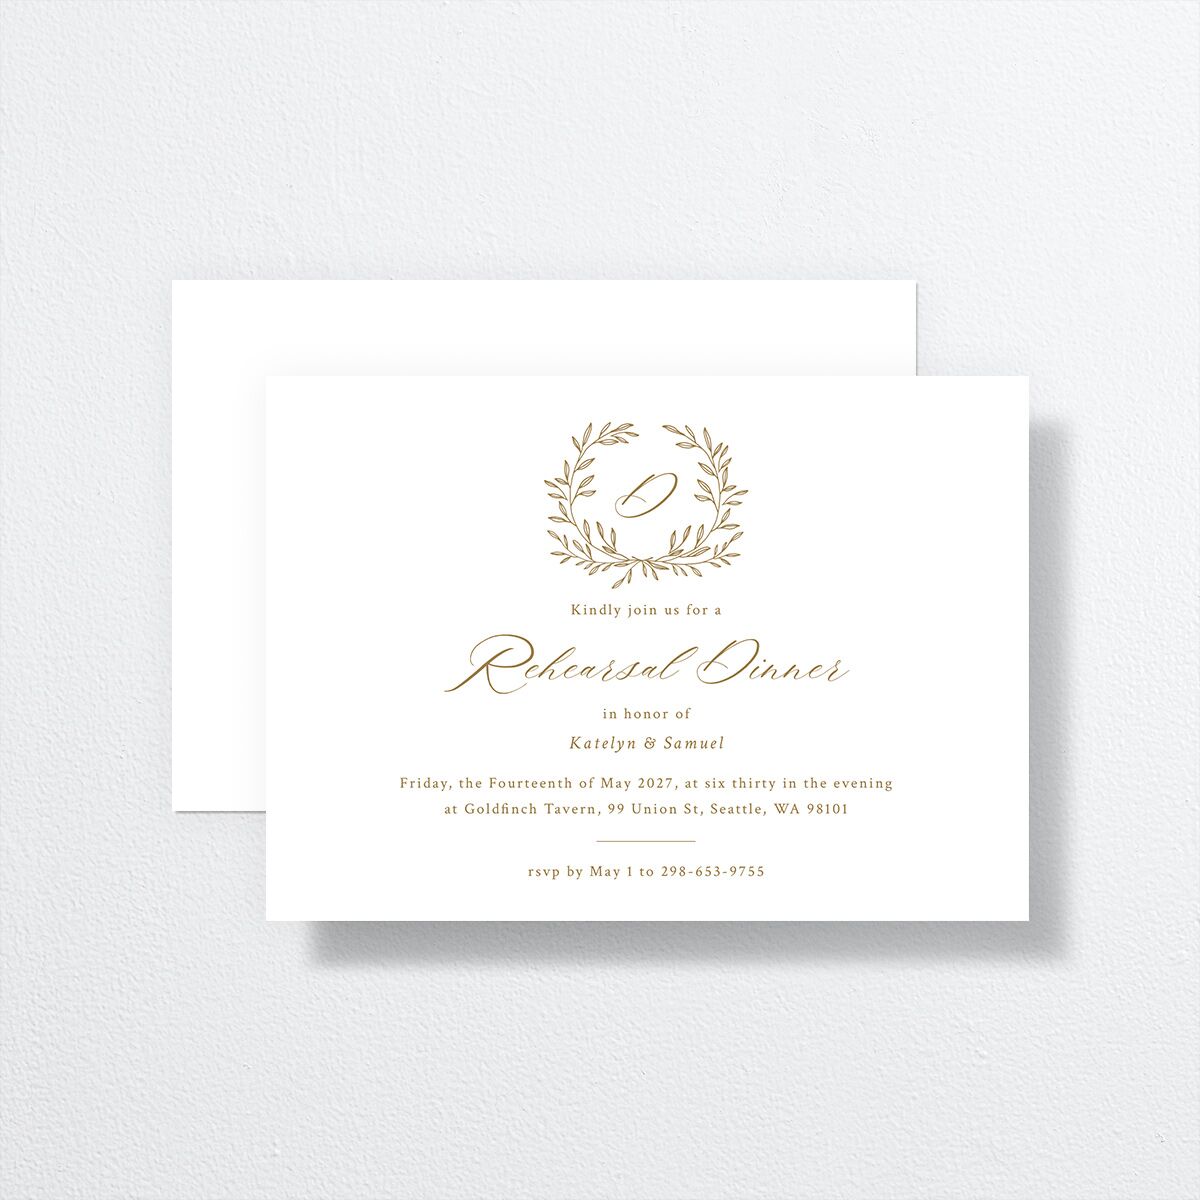 Monogram Wreath Rehearsal Dinner Invitations front-and-back in gold